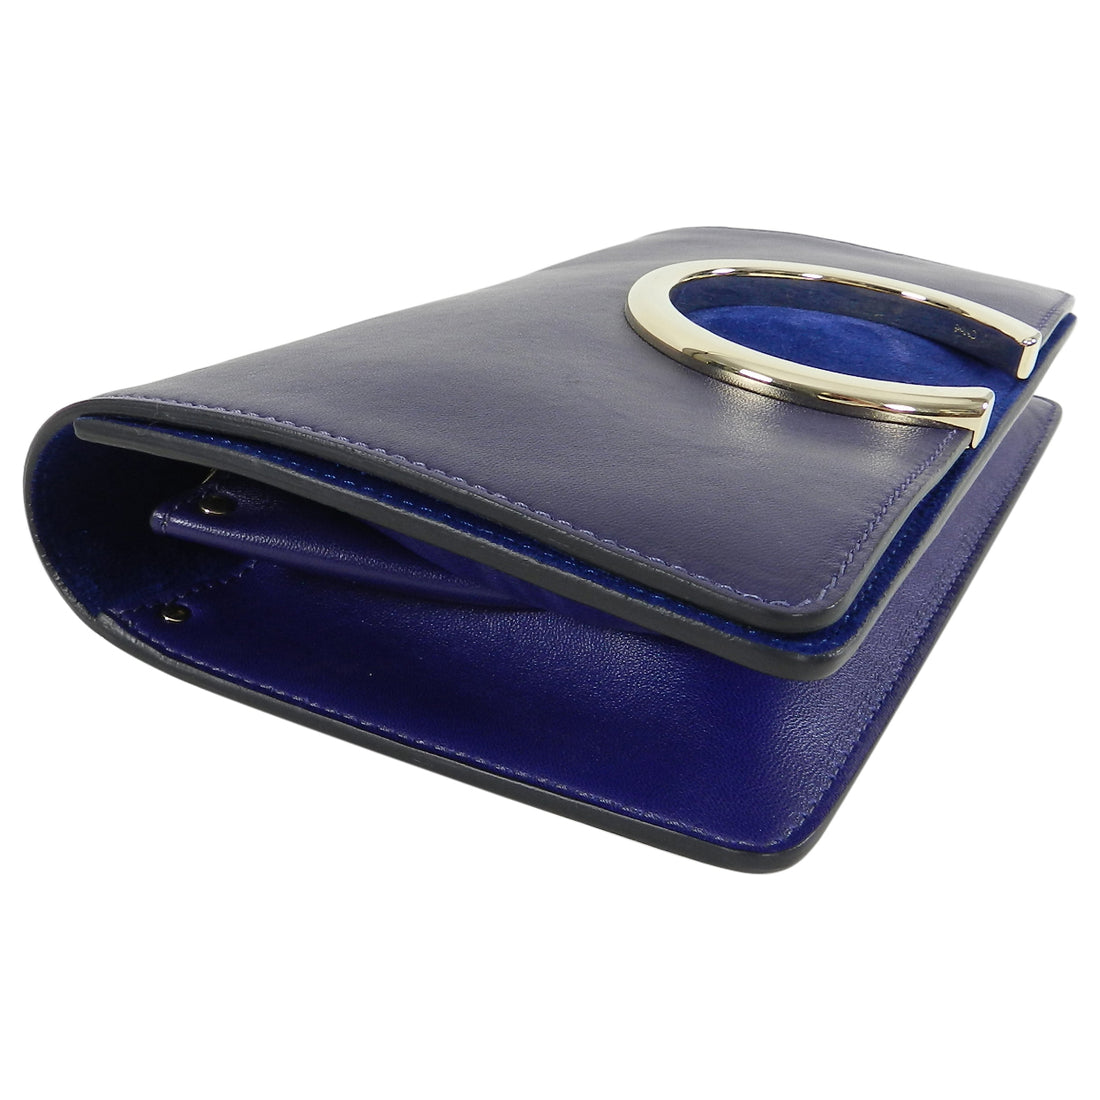 Chloe Navy Gabrielle Clutch Navy Leather and Suede